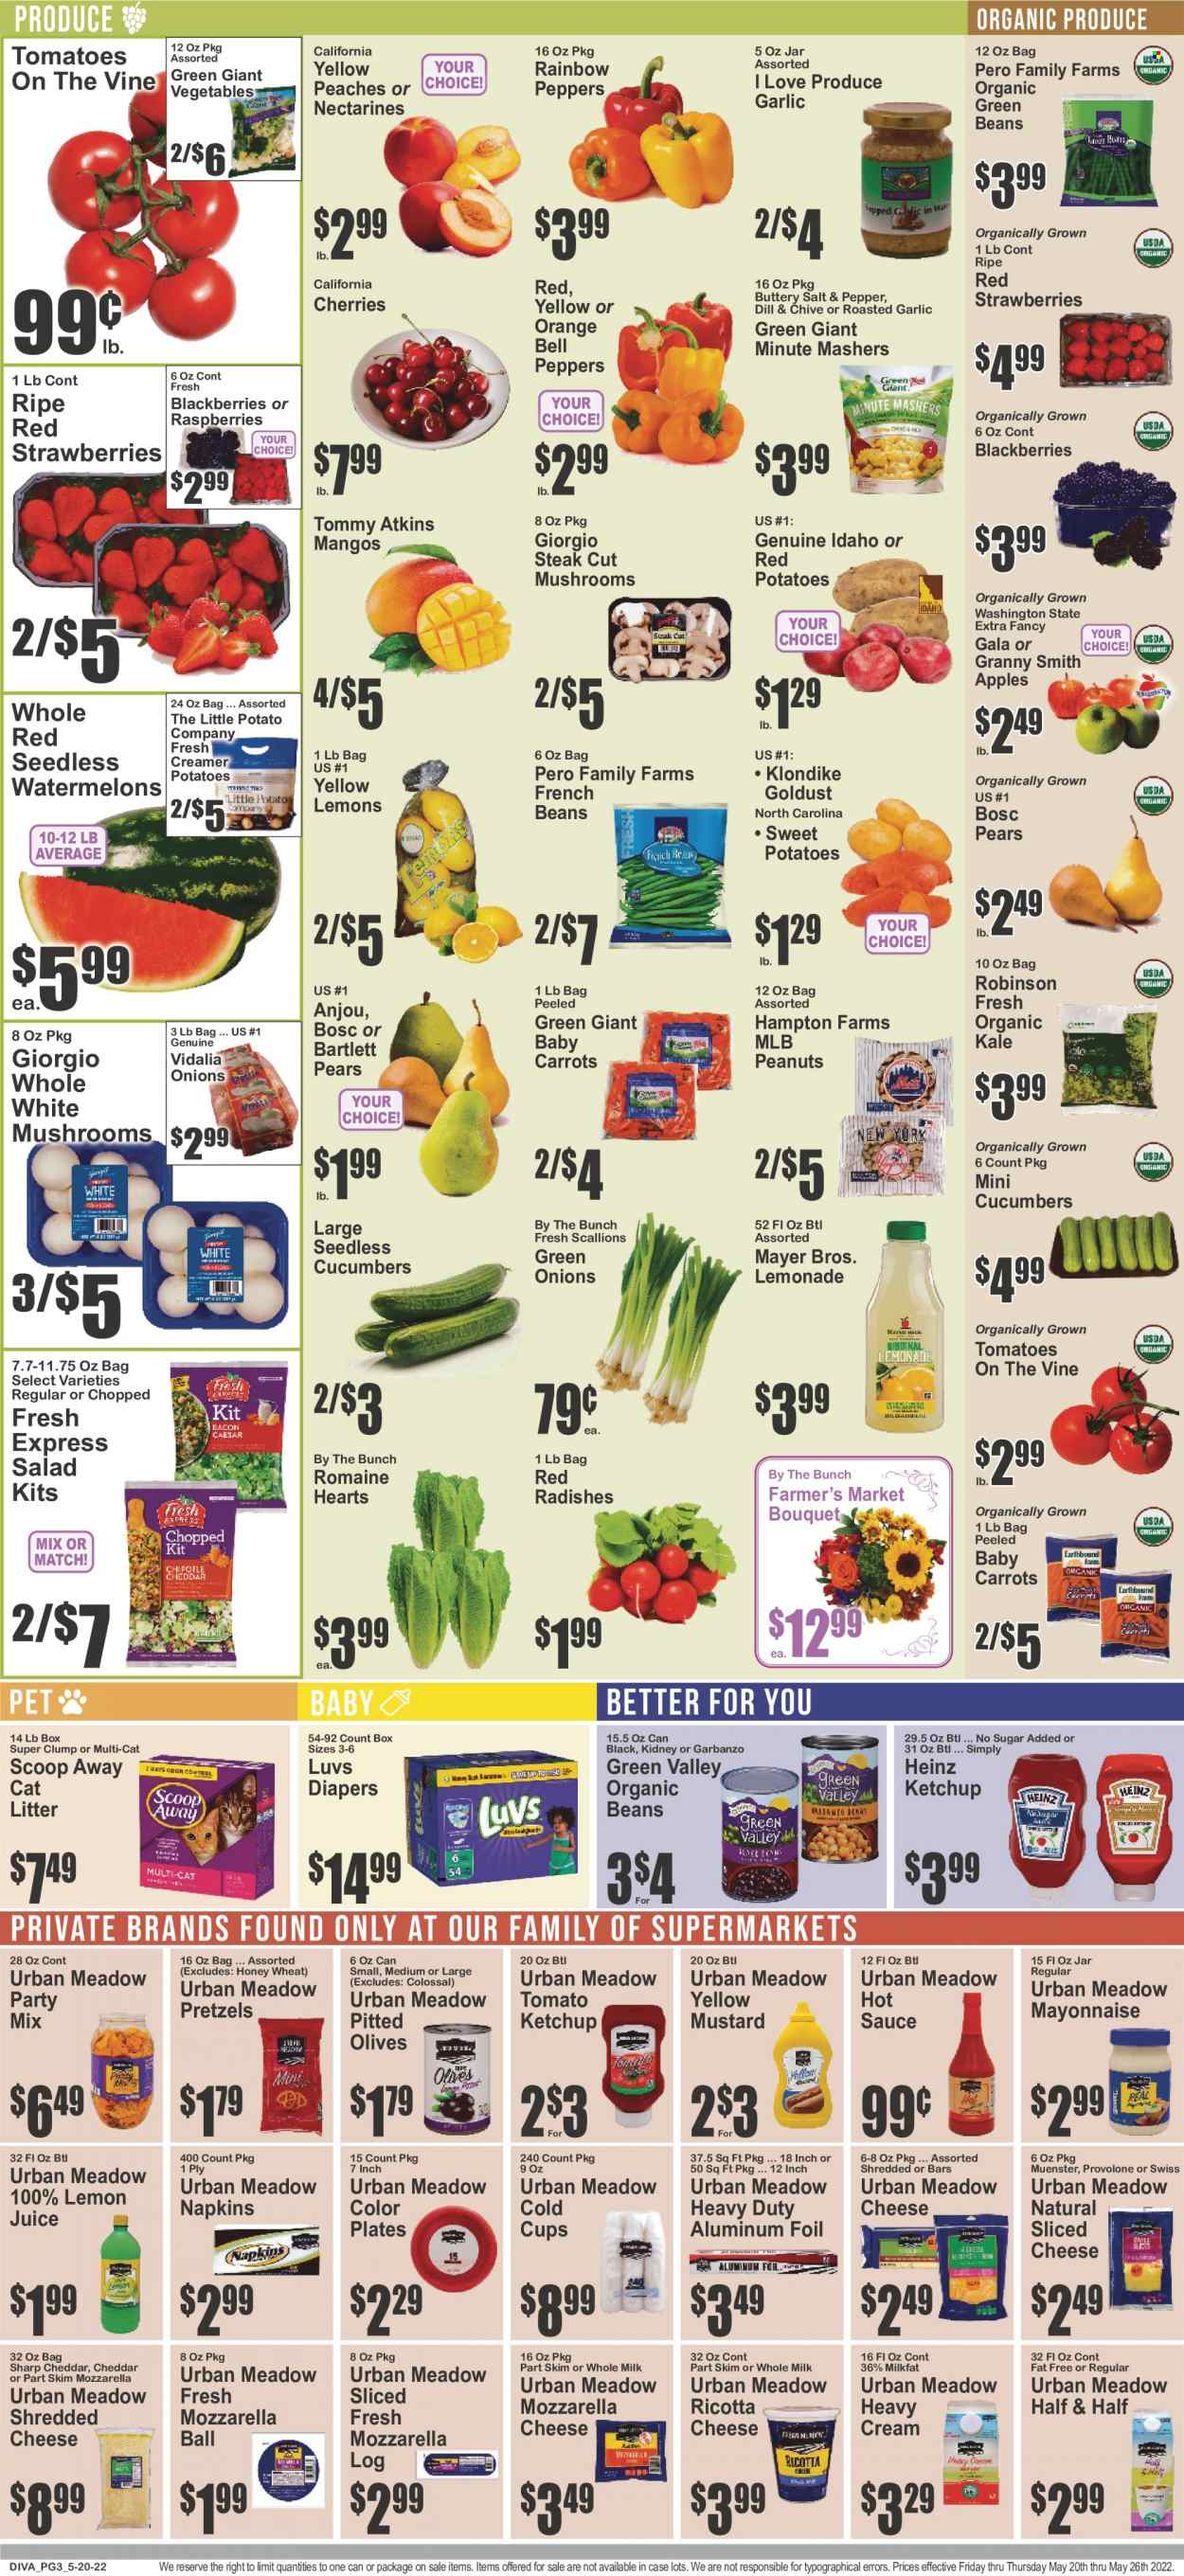 thumbnail - Key Food Flyer - 05/20/2022 - 05/26/2022 - Sales products - mushrooms, pretzels, beans, bell peppers, carrots, cucumber, french beans, green beans, radishes, sweet potato, tomatoes, kale, potatoes, salad, peppers, green onion, red potatoes, apples, Bartlett pears, blackberries, Gala, strawberries, cherries, pears, oranges, Granny Smith, sauce, mozzarella, ricotta, shredded cheese, sliced cheese, cheddar, Münster cheese, Provolone, milk, mayonnaise, Heinz, olives, dill, mustard, hot sauce, ketchup, peanuts, lemonade, lemon juice, steak, napkins, nappies, plate, cup, cat litter, bouquet, nectarines, Half and half, peaches. Page 3.